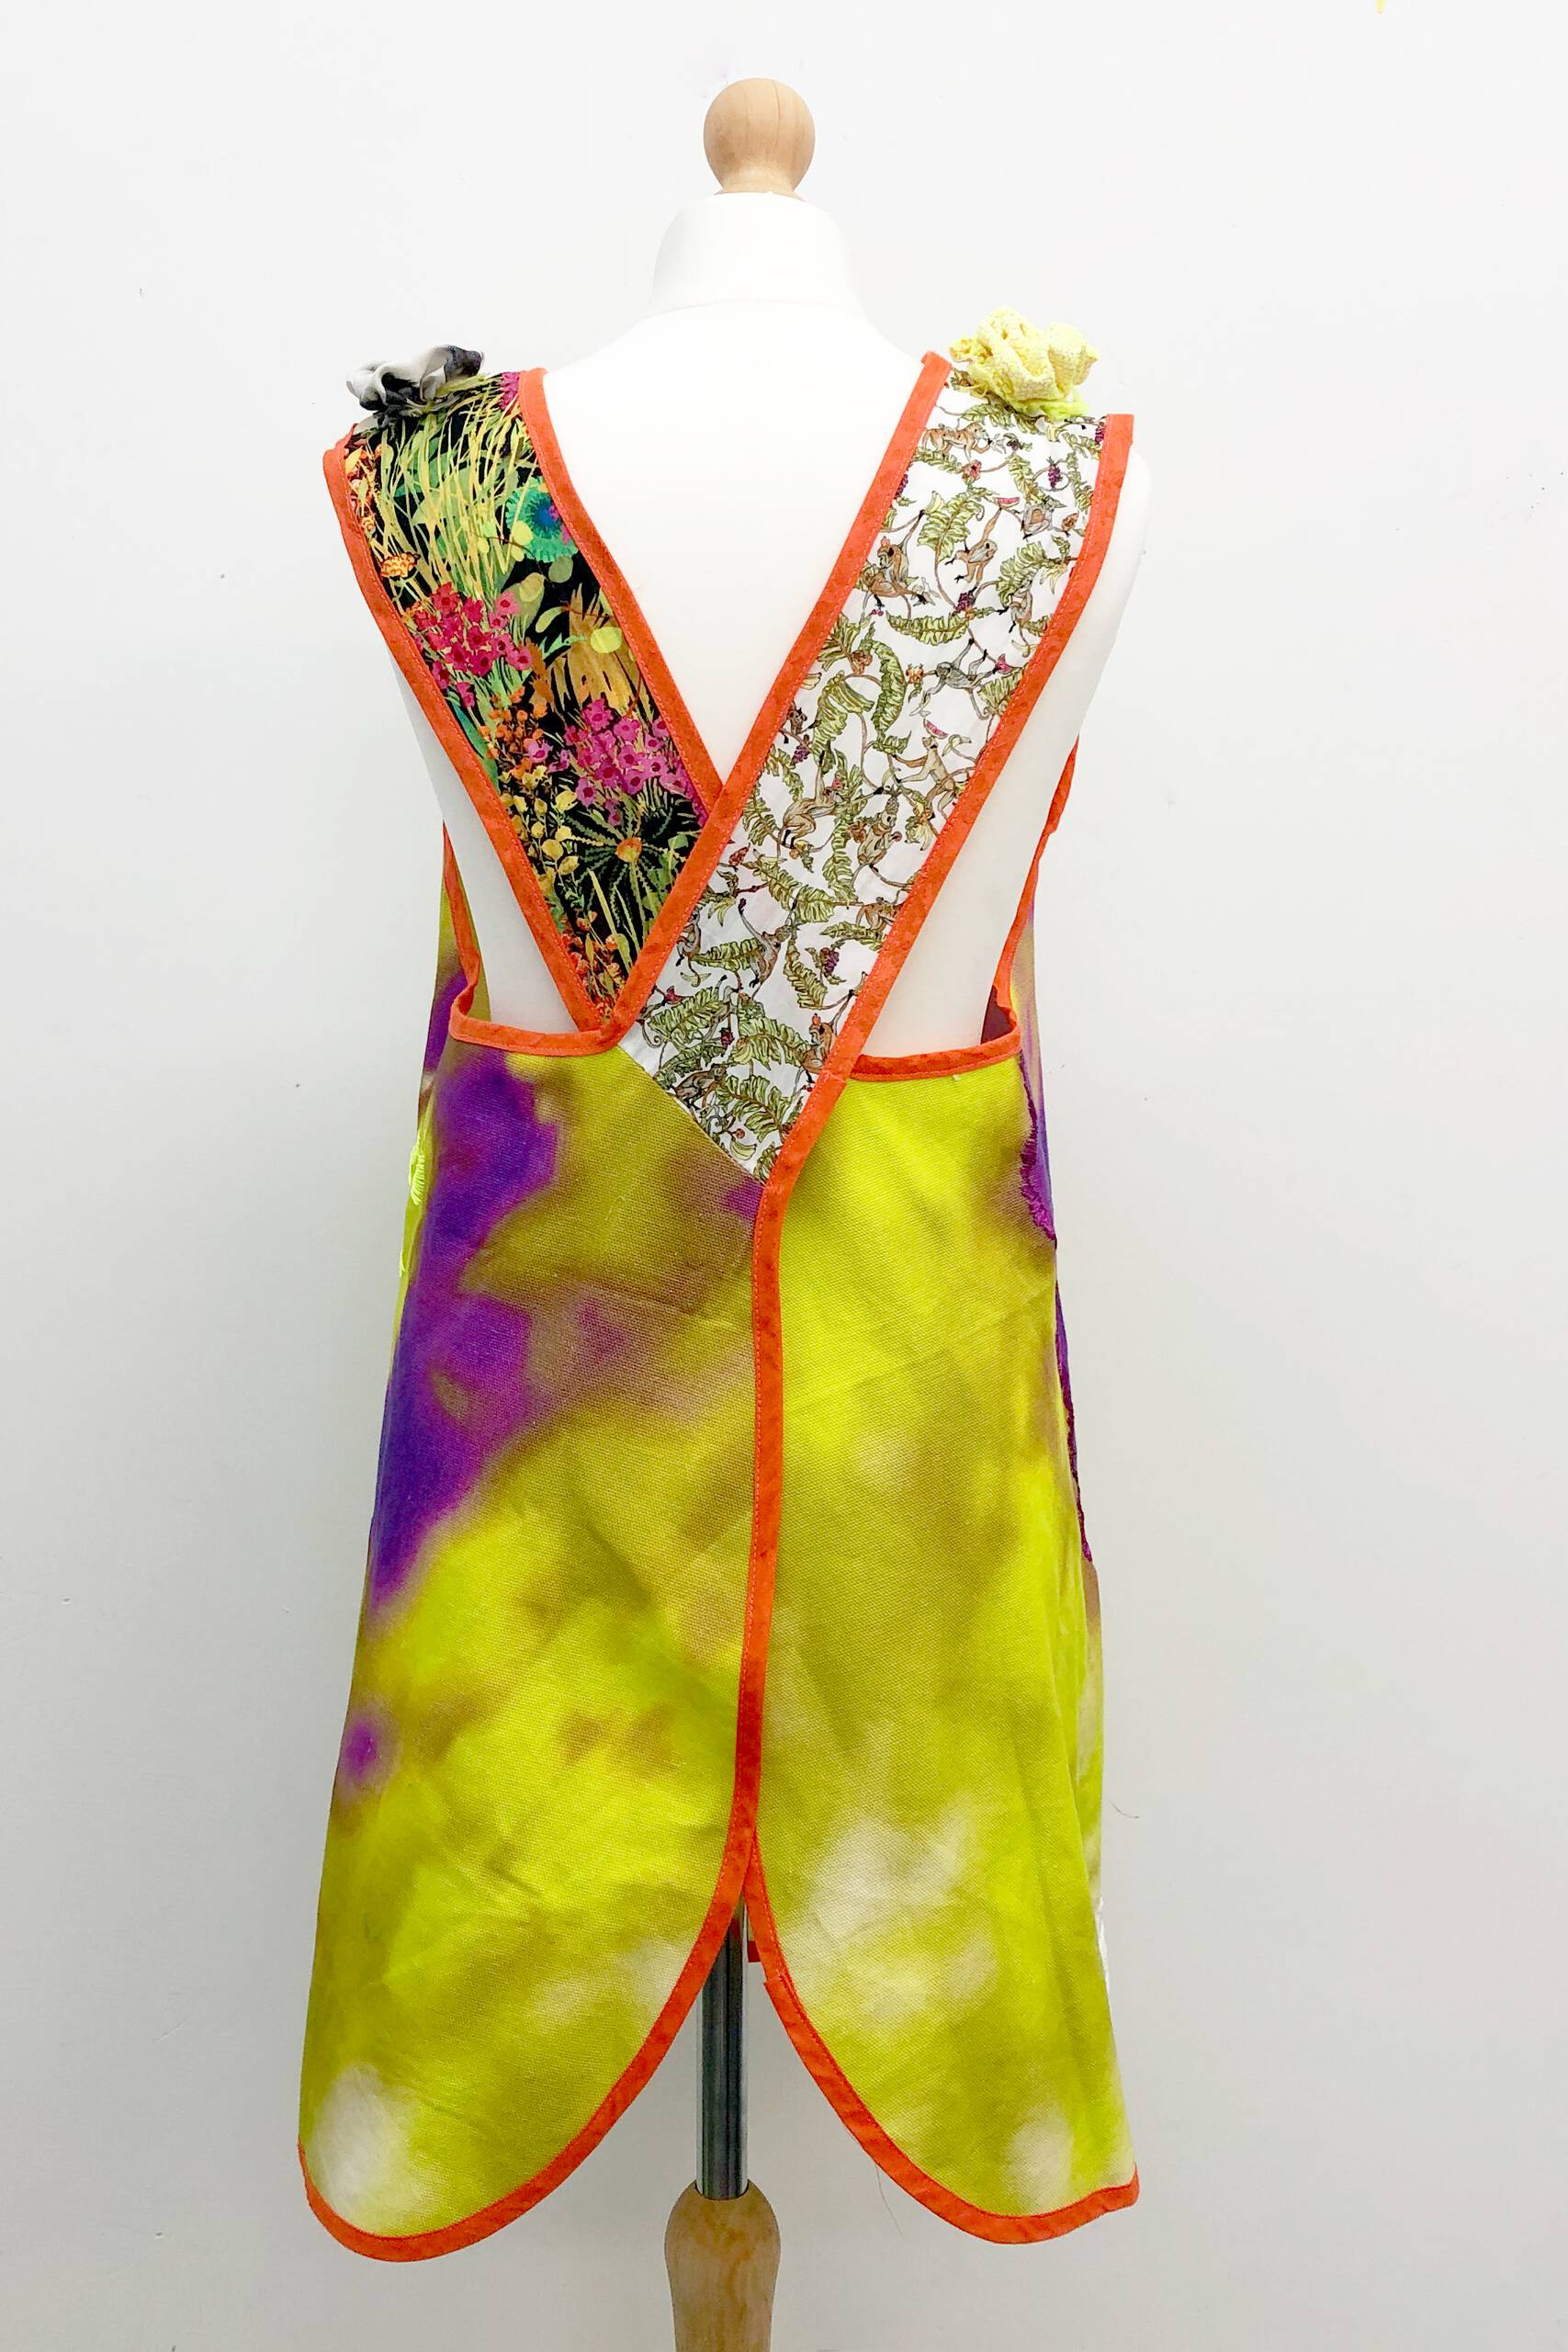 Fruits of Origin [pineapple] (collaboration with Goia Mujalli), Fabric, acrylic paint, hand-embroidery on hand-sewn garment, 2019